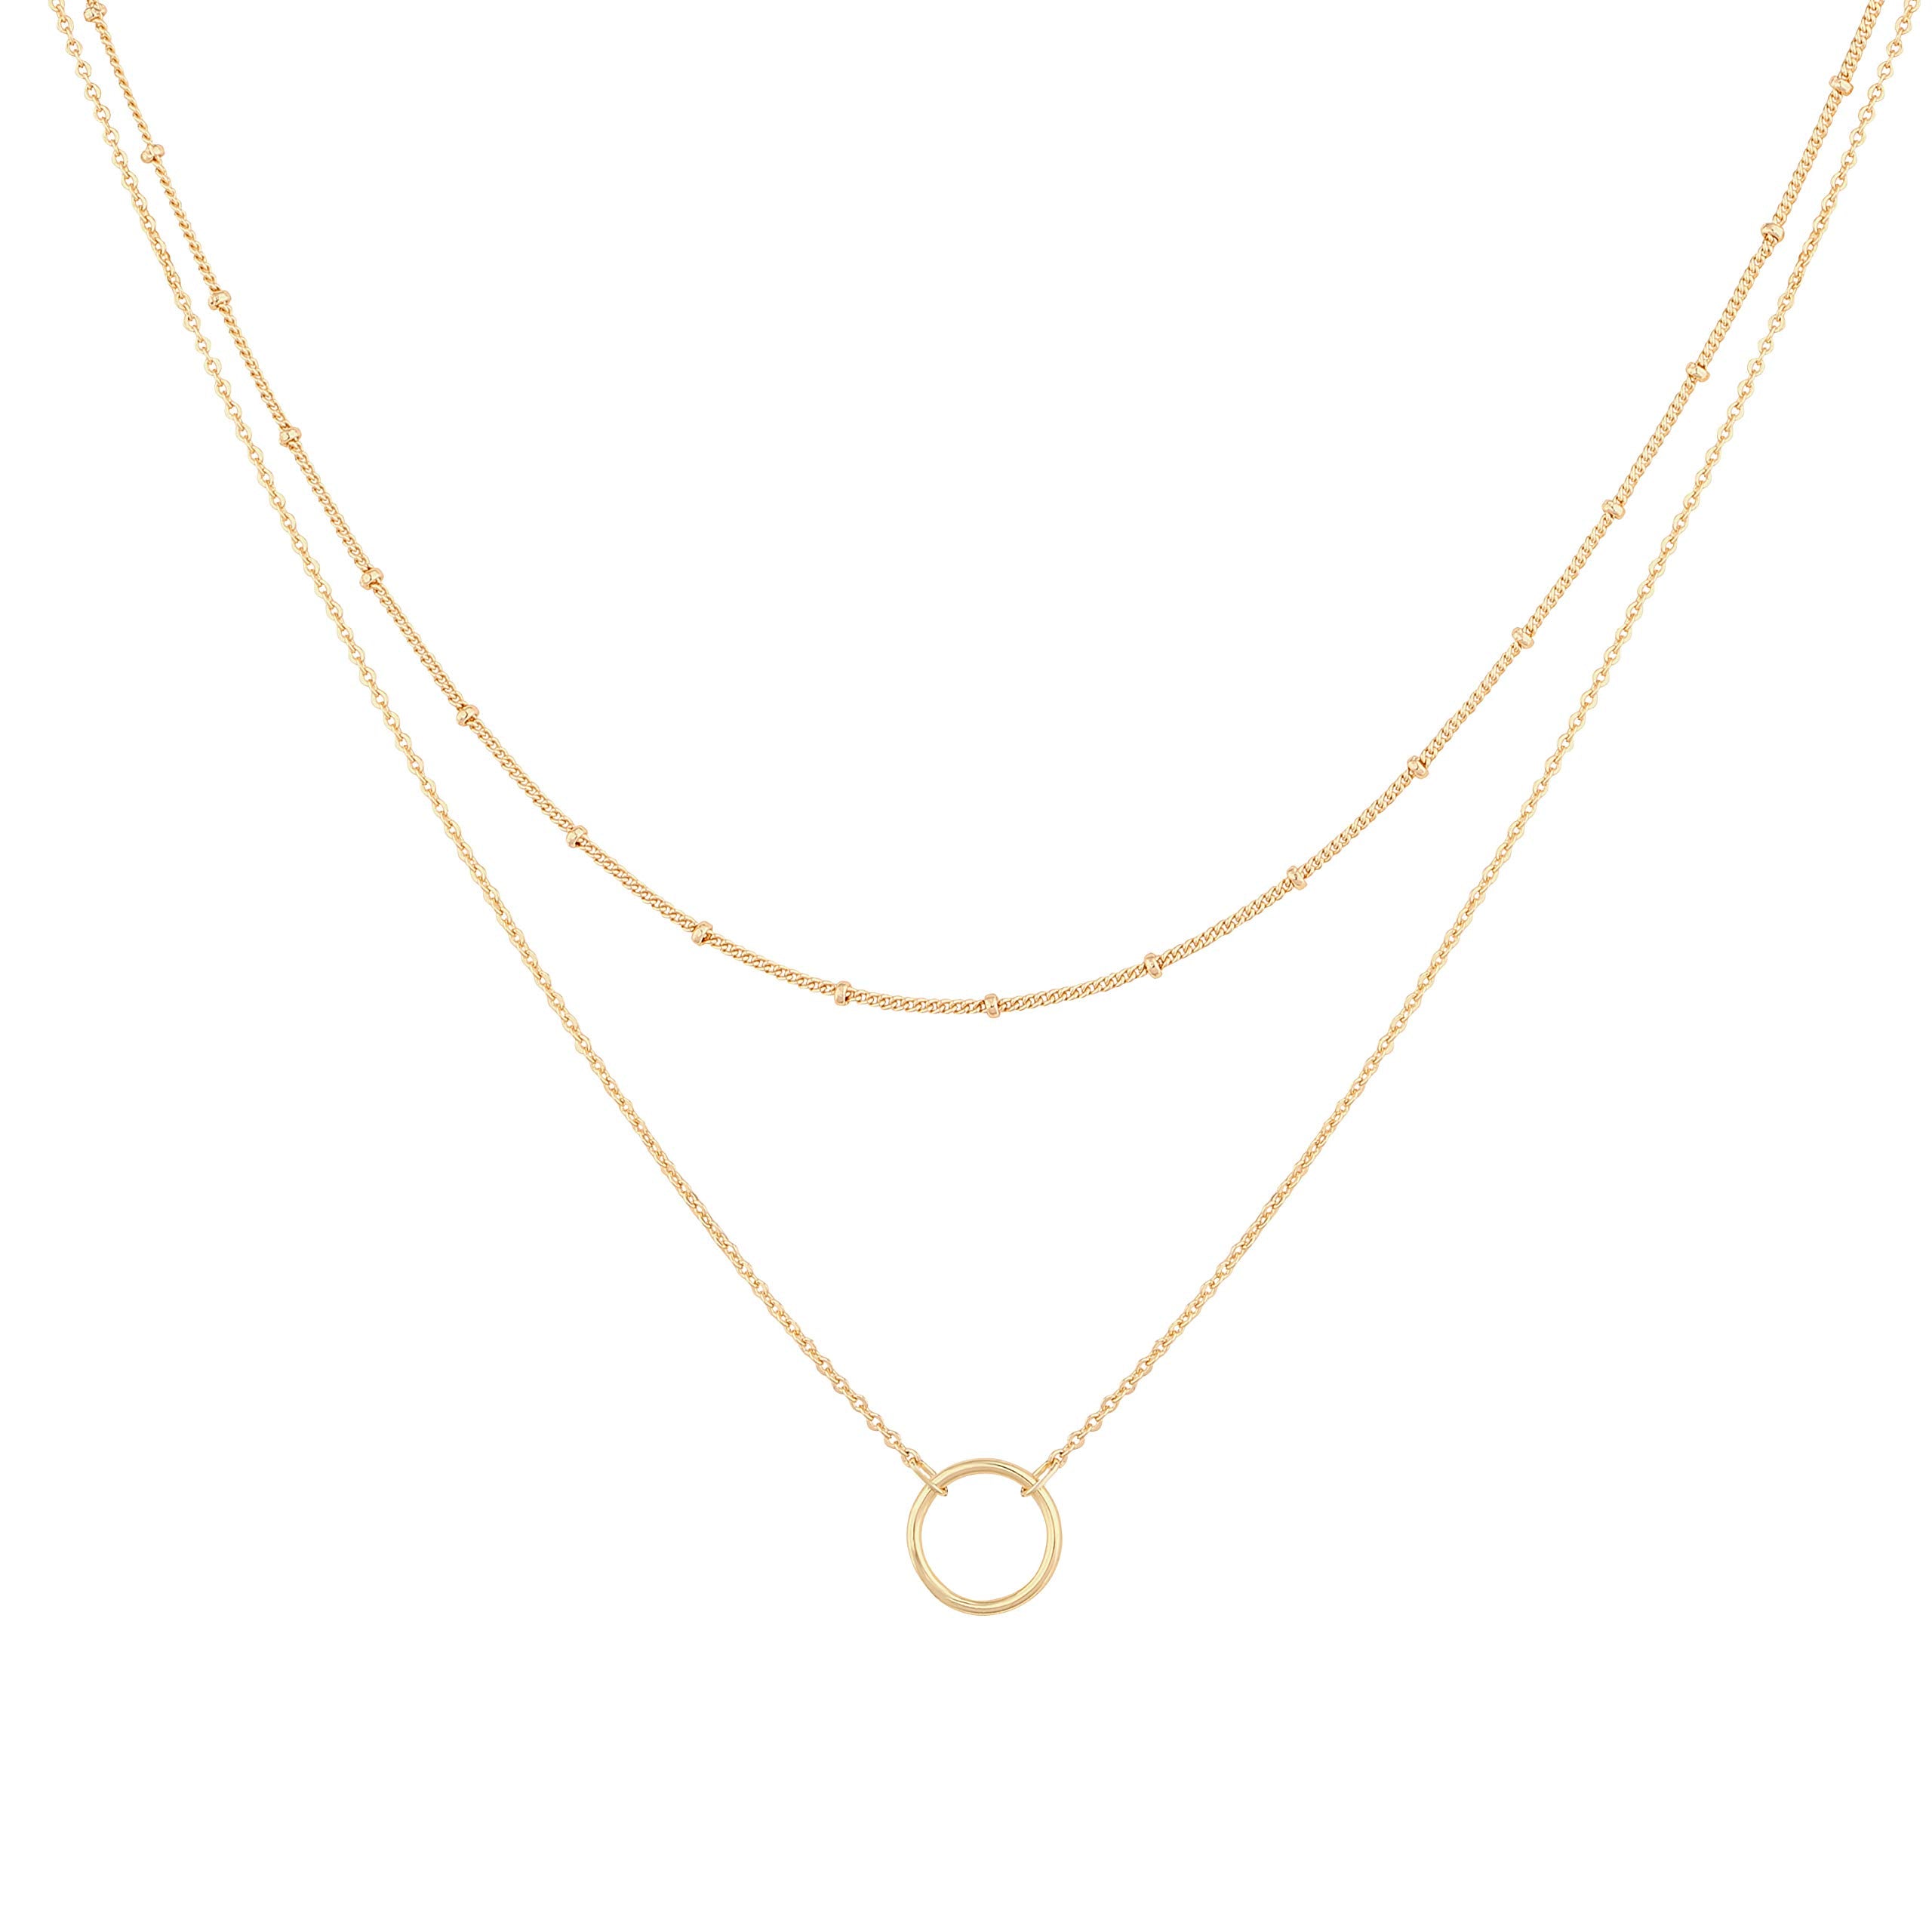 MEVECCO Gold Layered Choker Necklace for Women,18K Gold Plated Cute Dainty Karma Round Circle Disc Charm Small Beaded Satellite Chain Minimalist Choker Necklace for Girls